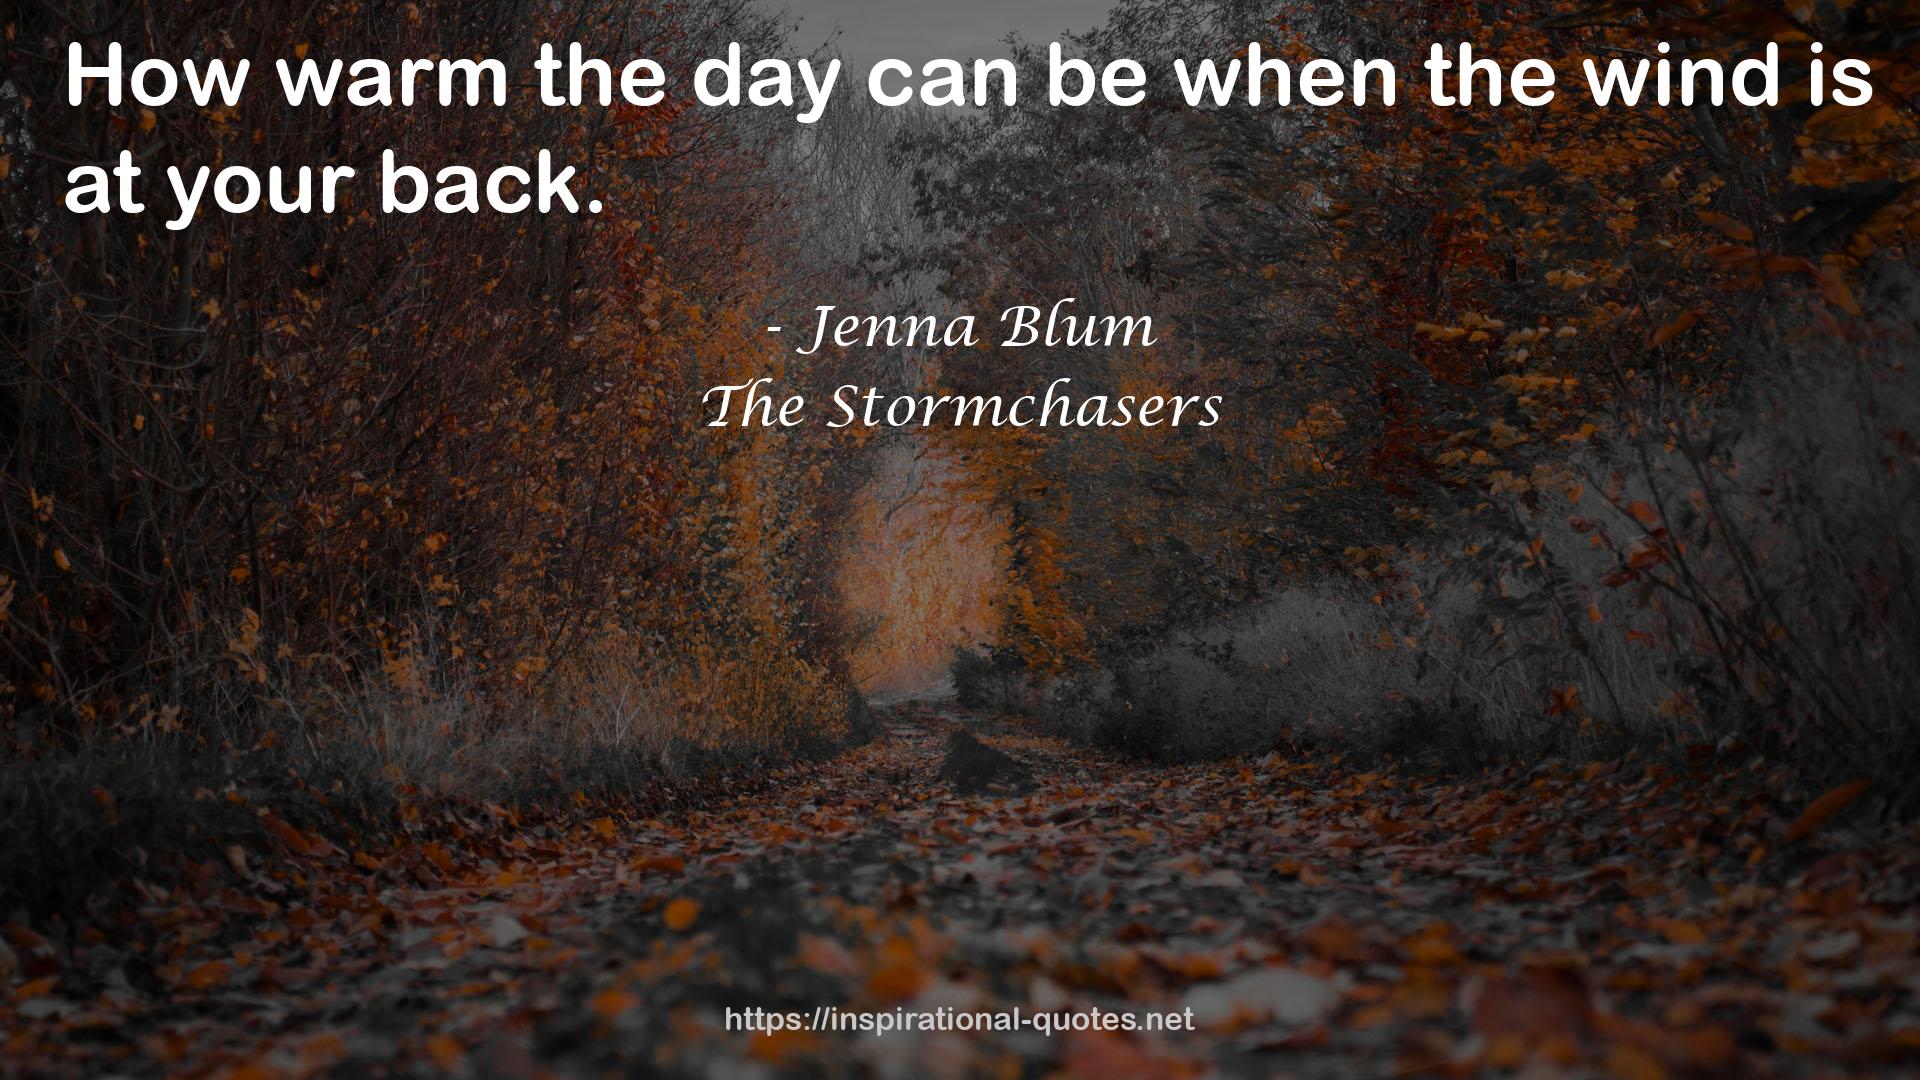 The Stormchasers QUOTES